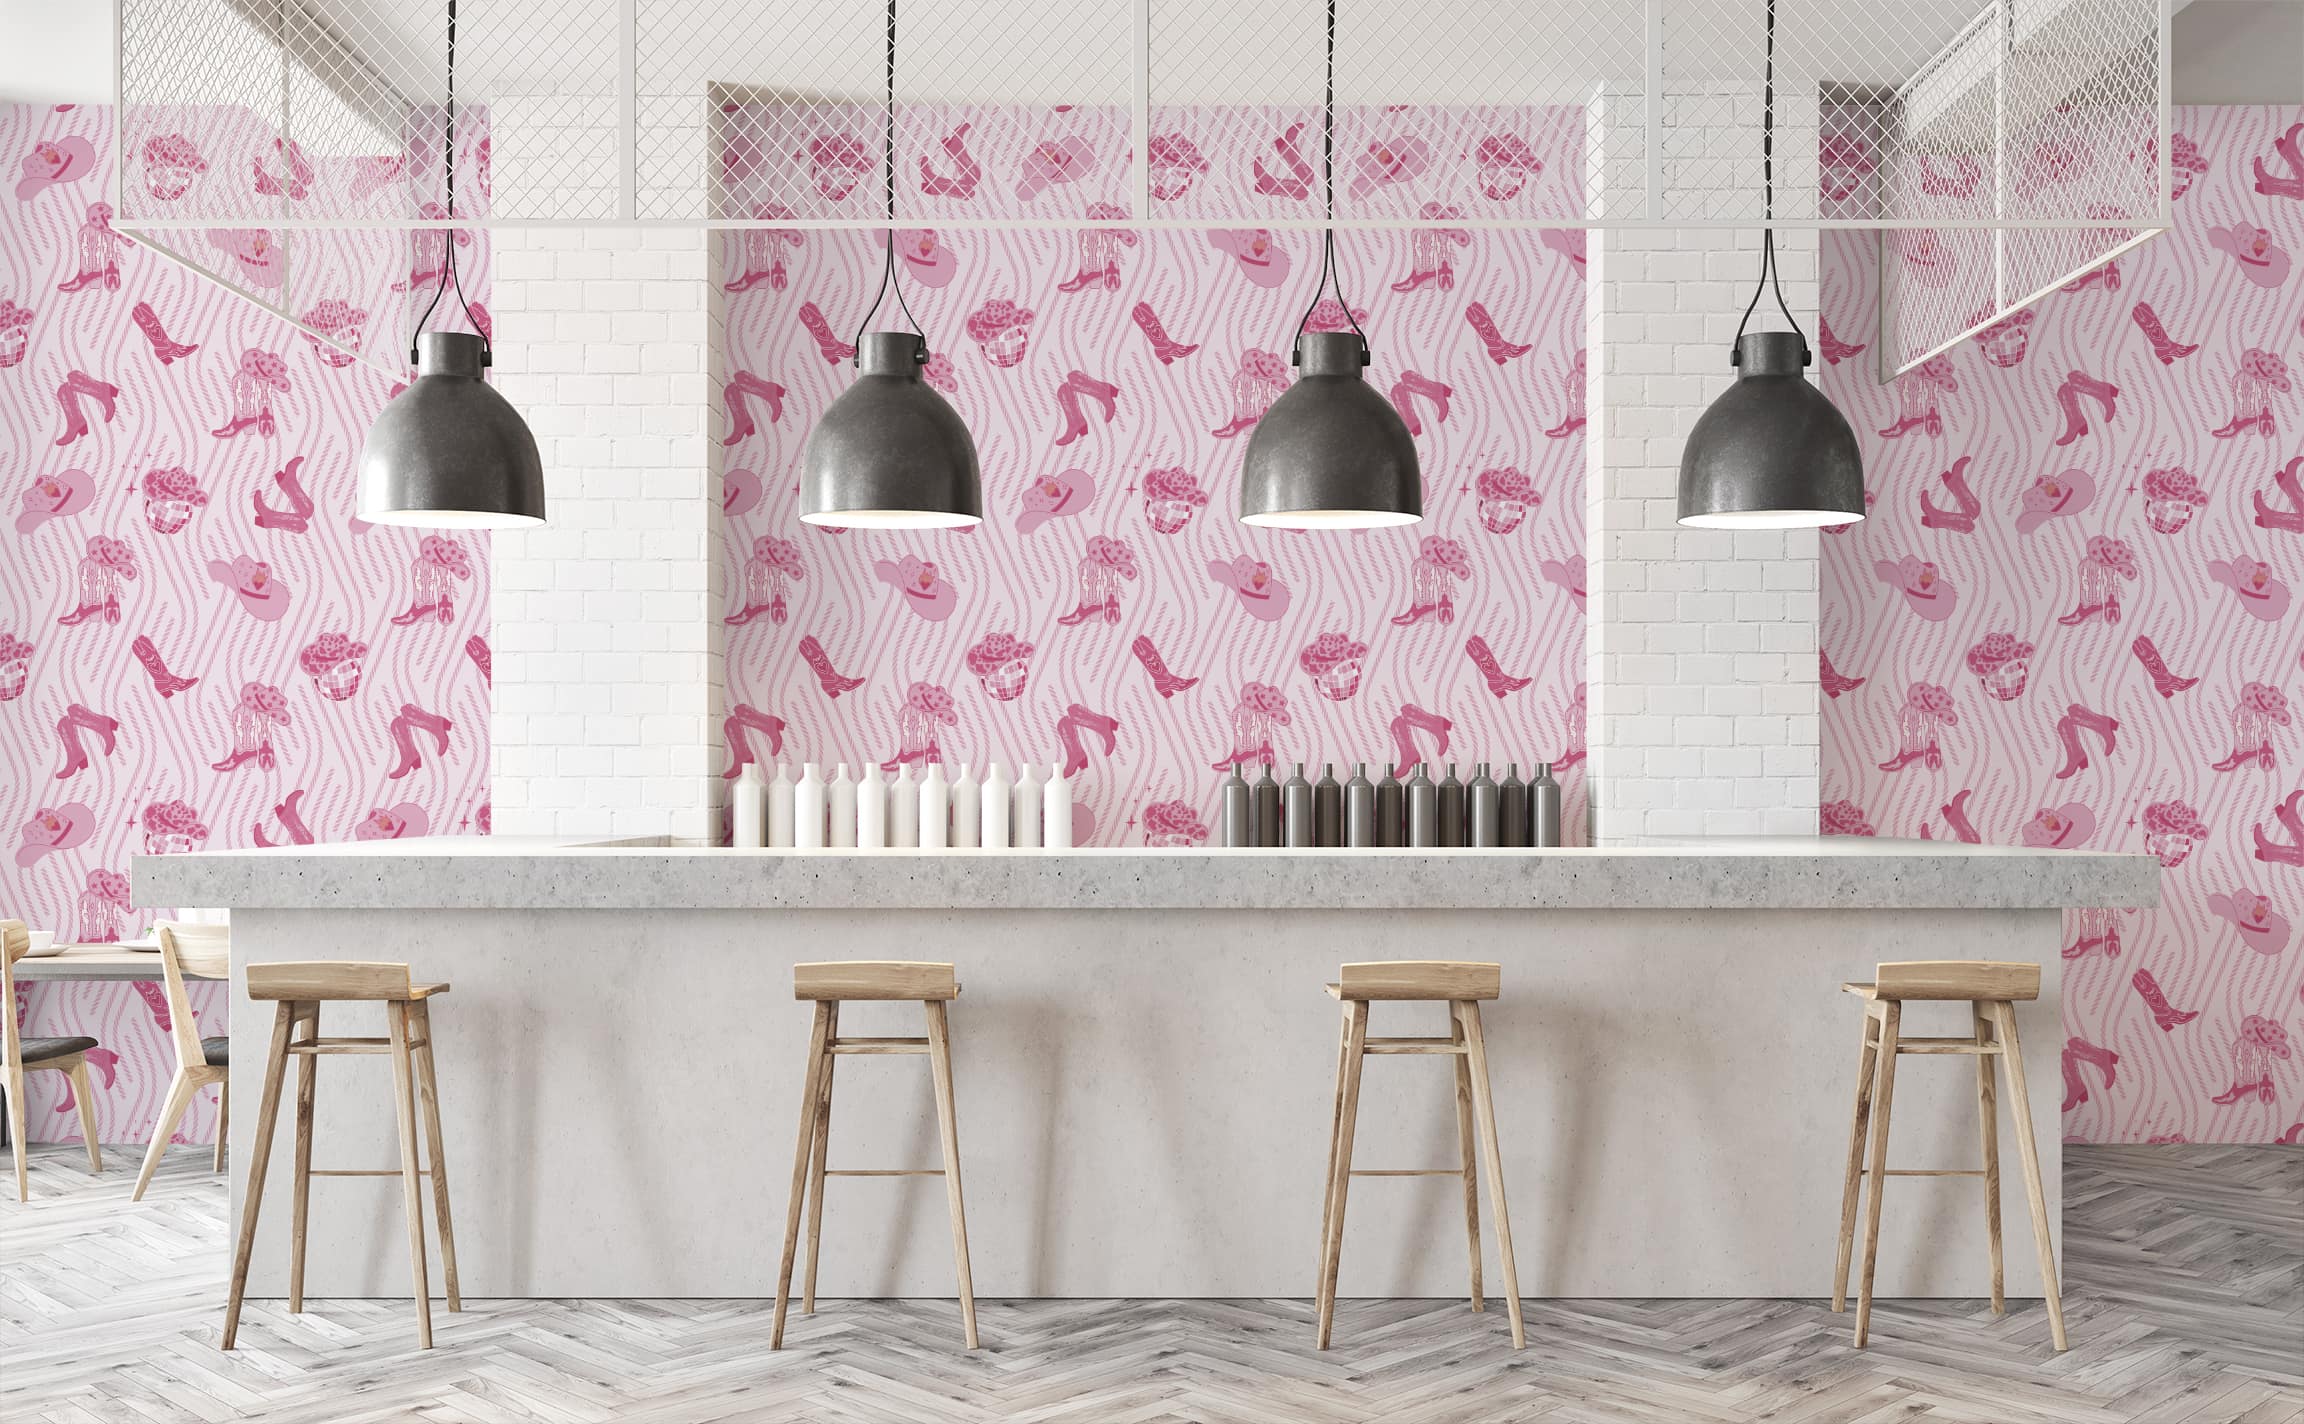 These Wallpaper Pastes Make Wall Design Projects Easy